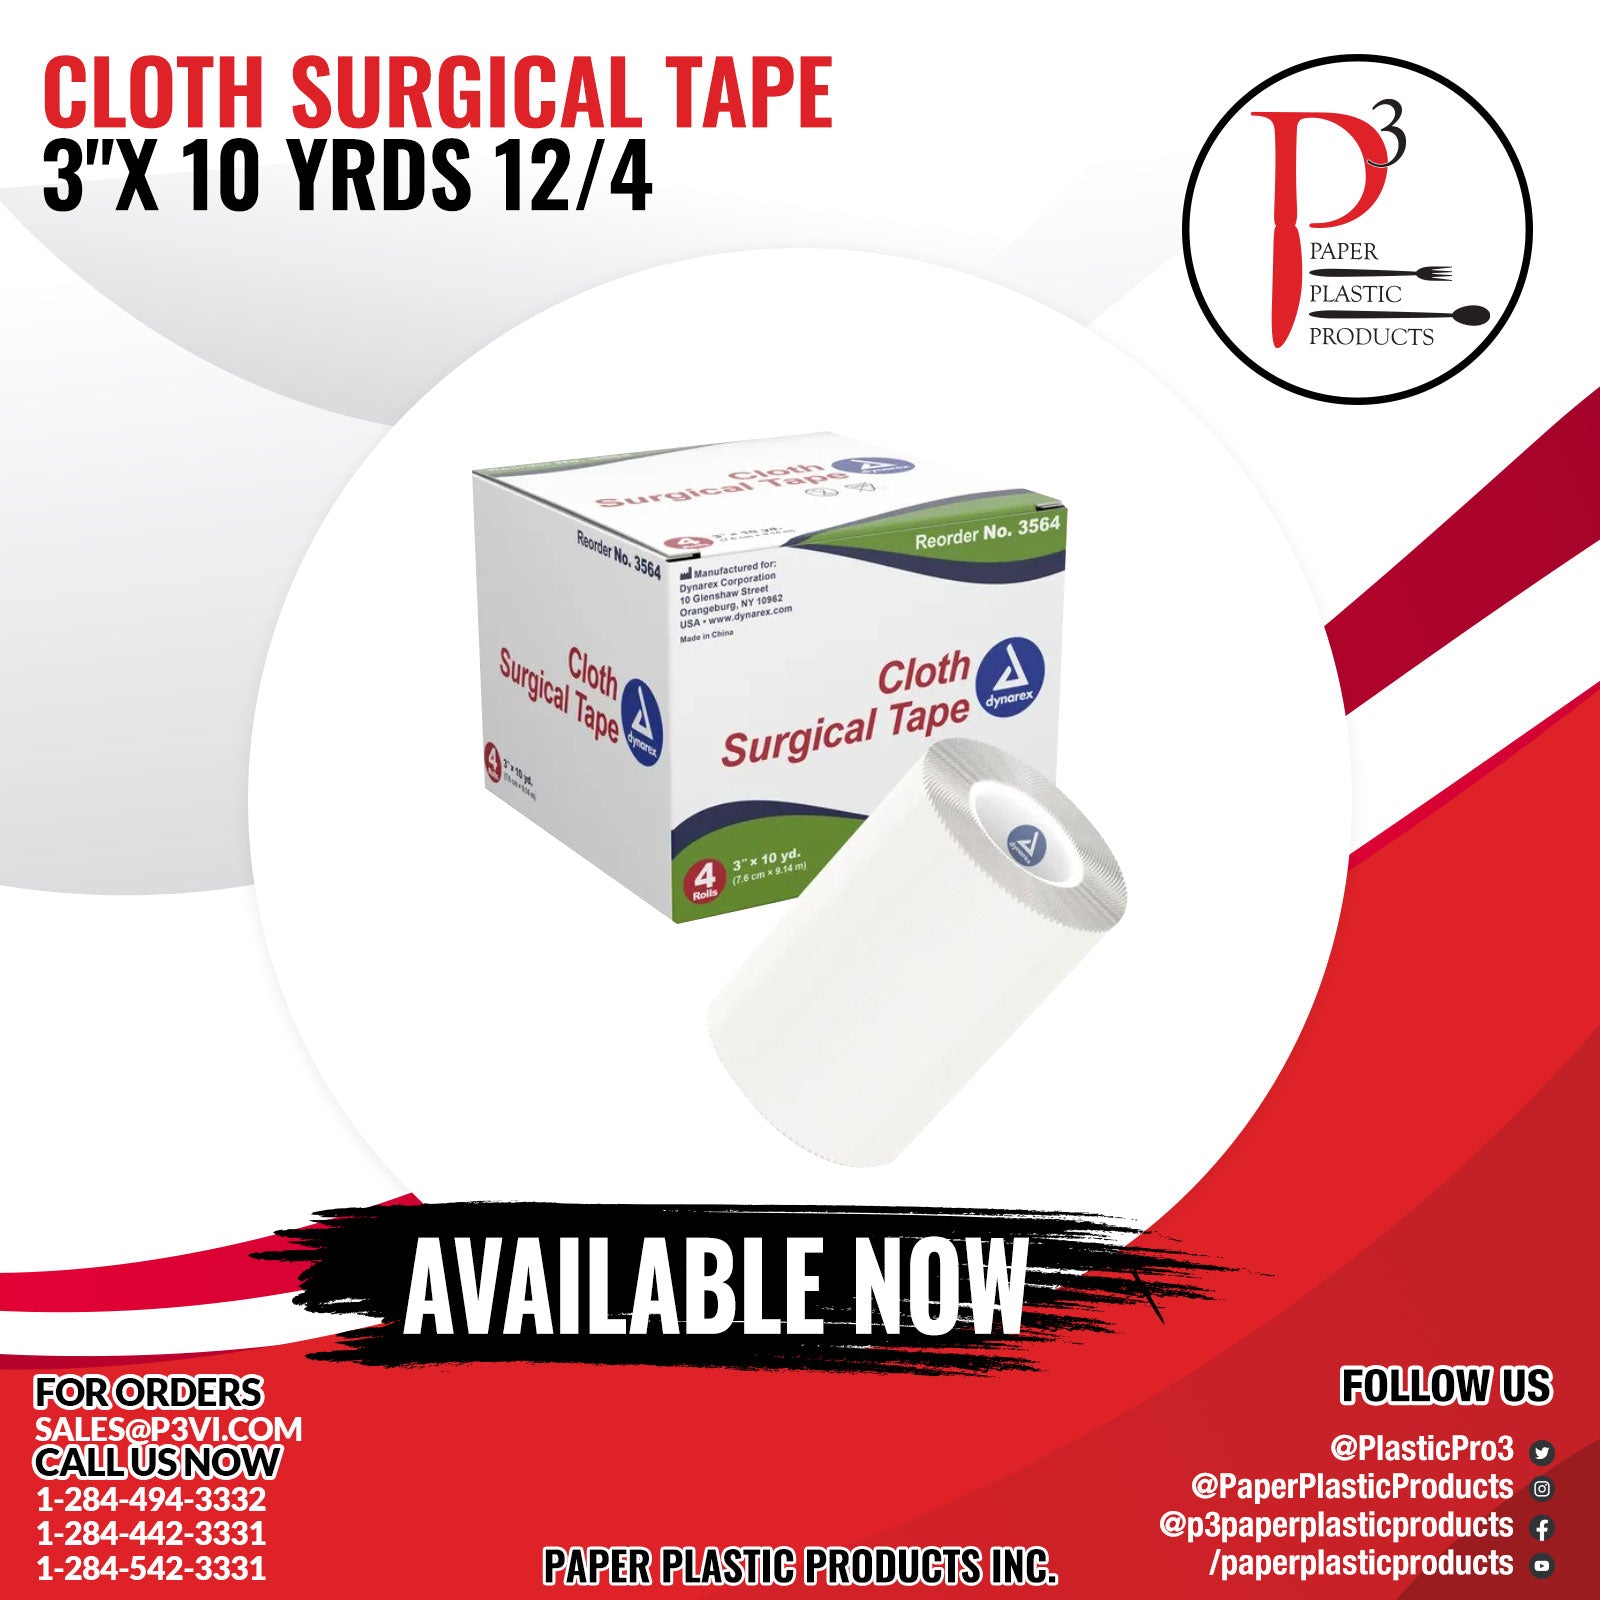 Cloth Surgical Tape 3"x 10 yrds 12/4